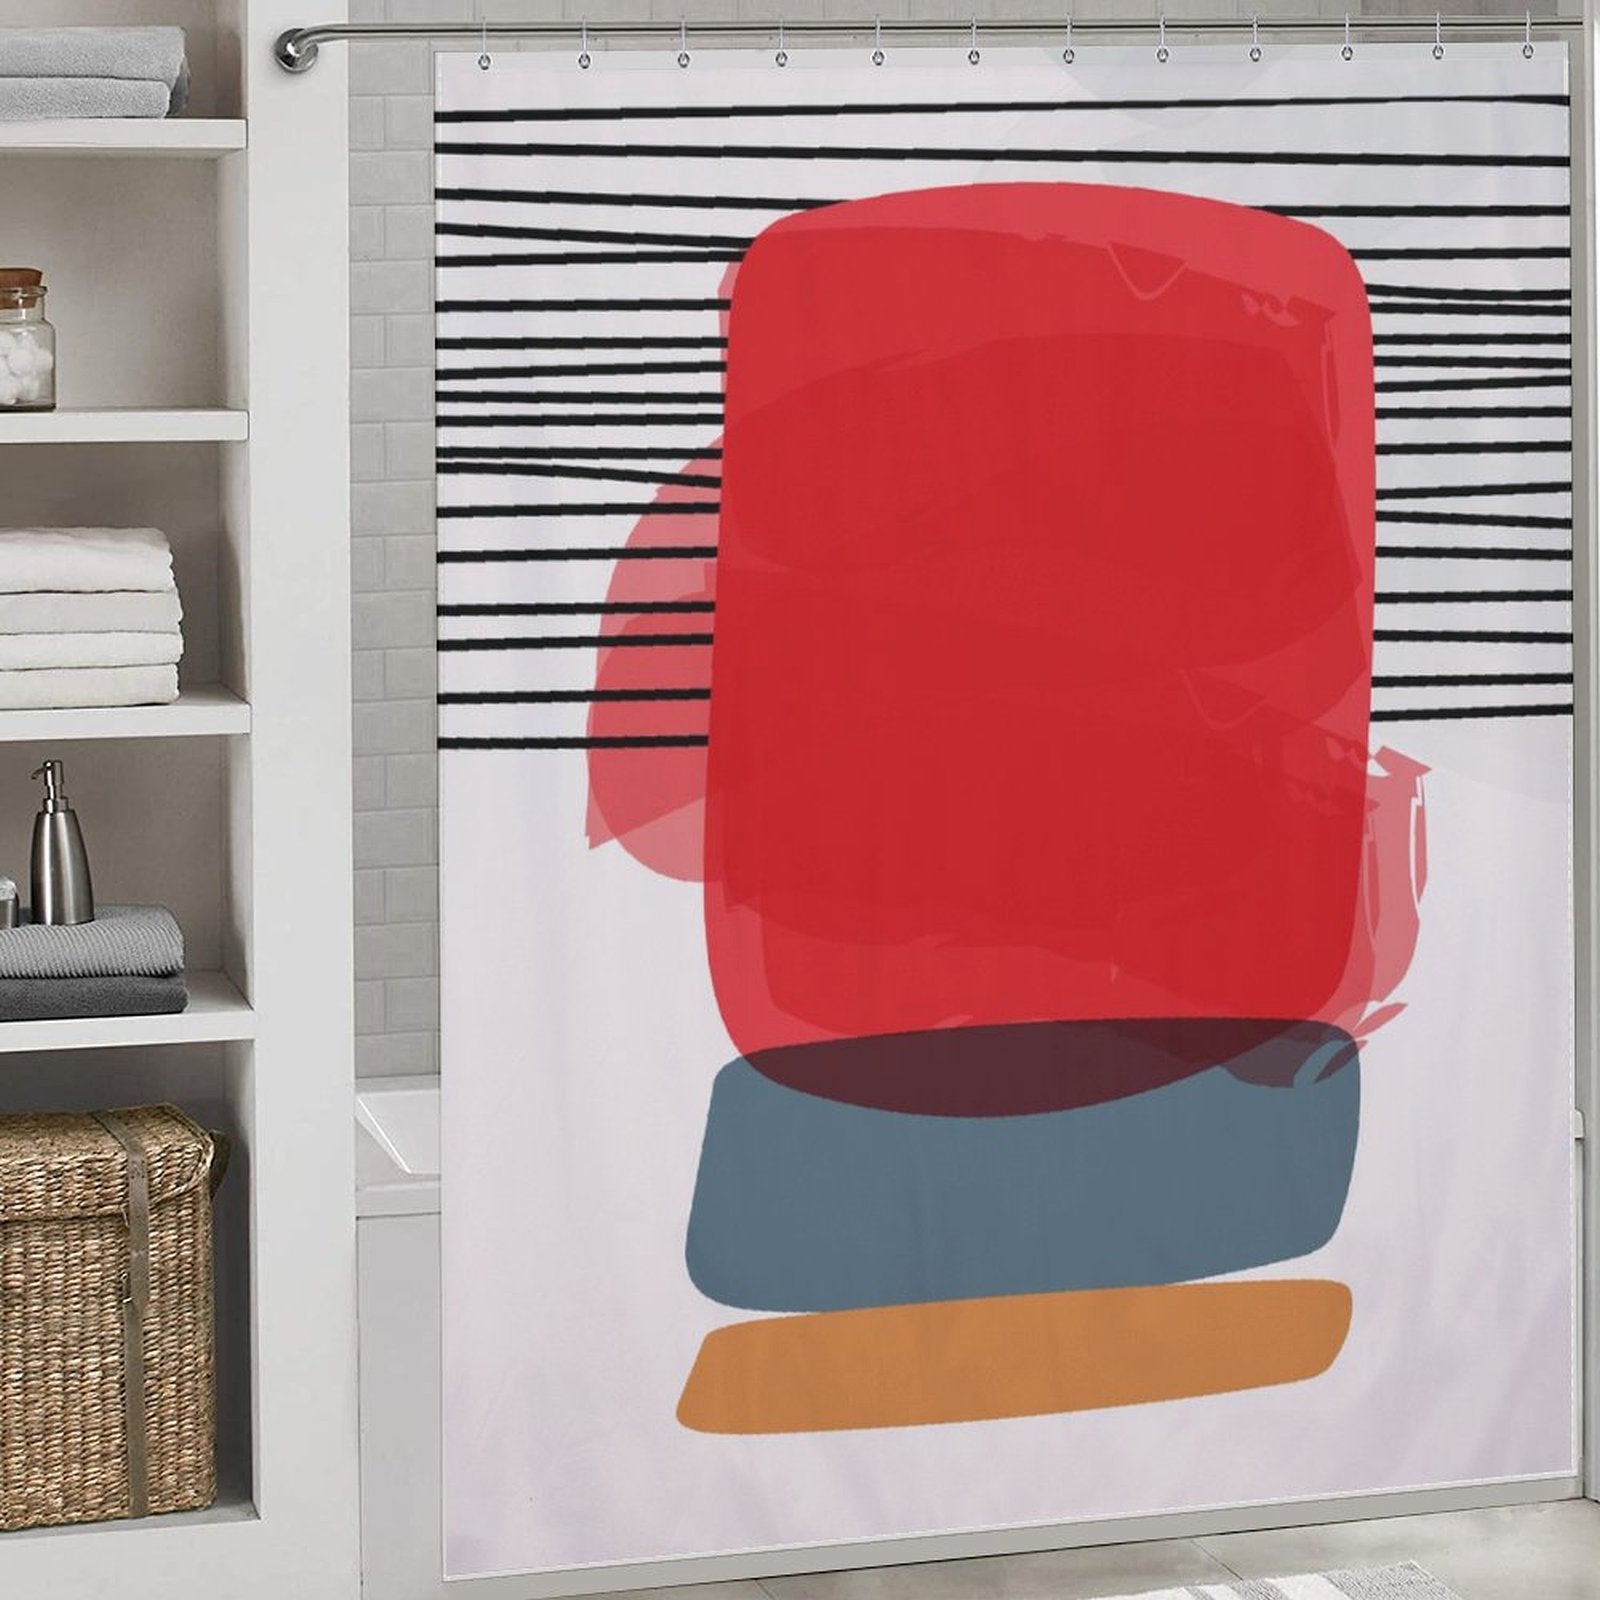 A Cotton Cat Modern Geometric Art Minimalist Simple Red Blue Orange Abstract Shower Curtain-Cottoncat showcases a large red shape, blue and orange shapes underneath, and black horizontal lines at the top. This striking piece of red-blue-orange decor hangs in a bathroom adorned with shelves and baskets.